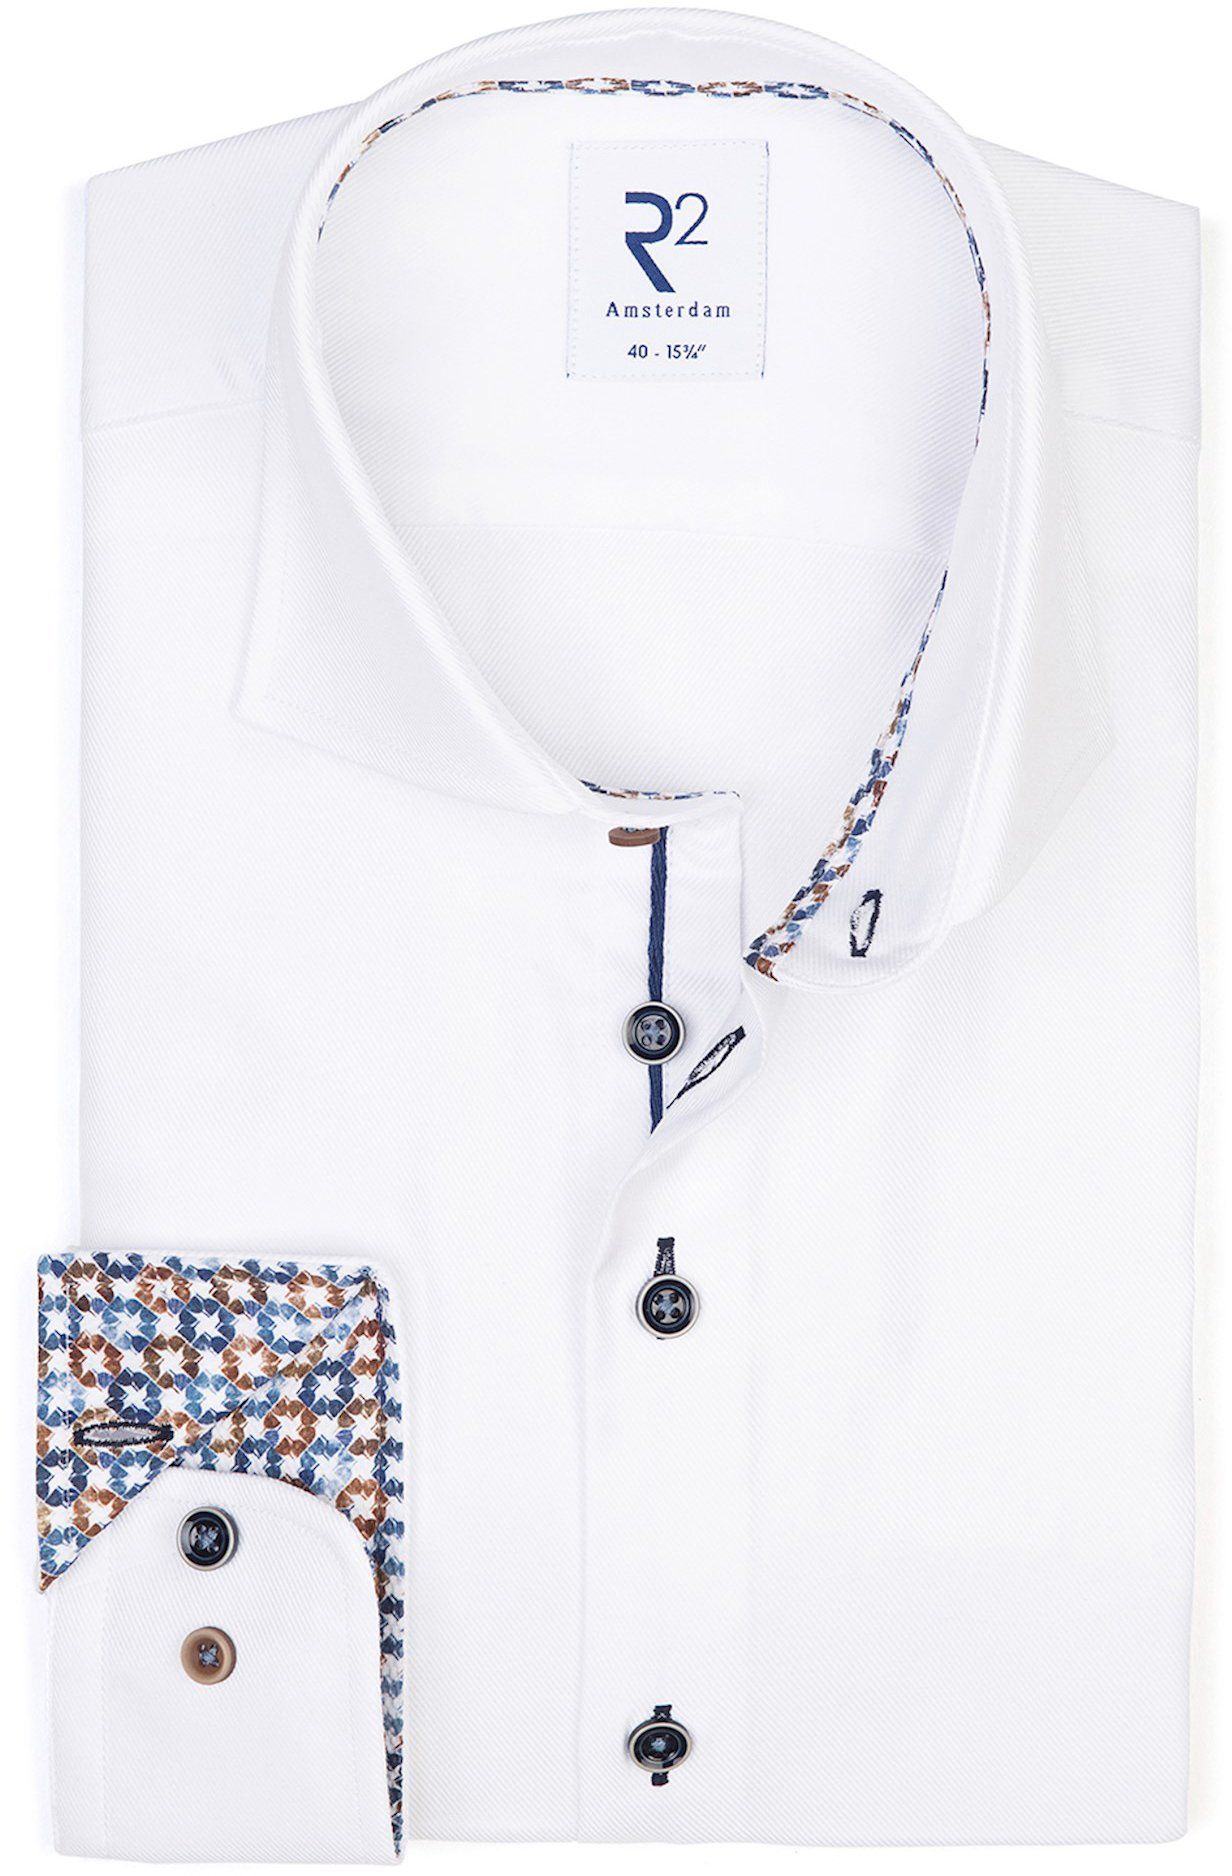 R2 Chemise Twill Blanche Blanc taille 38